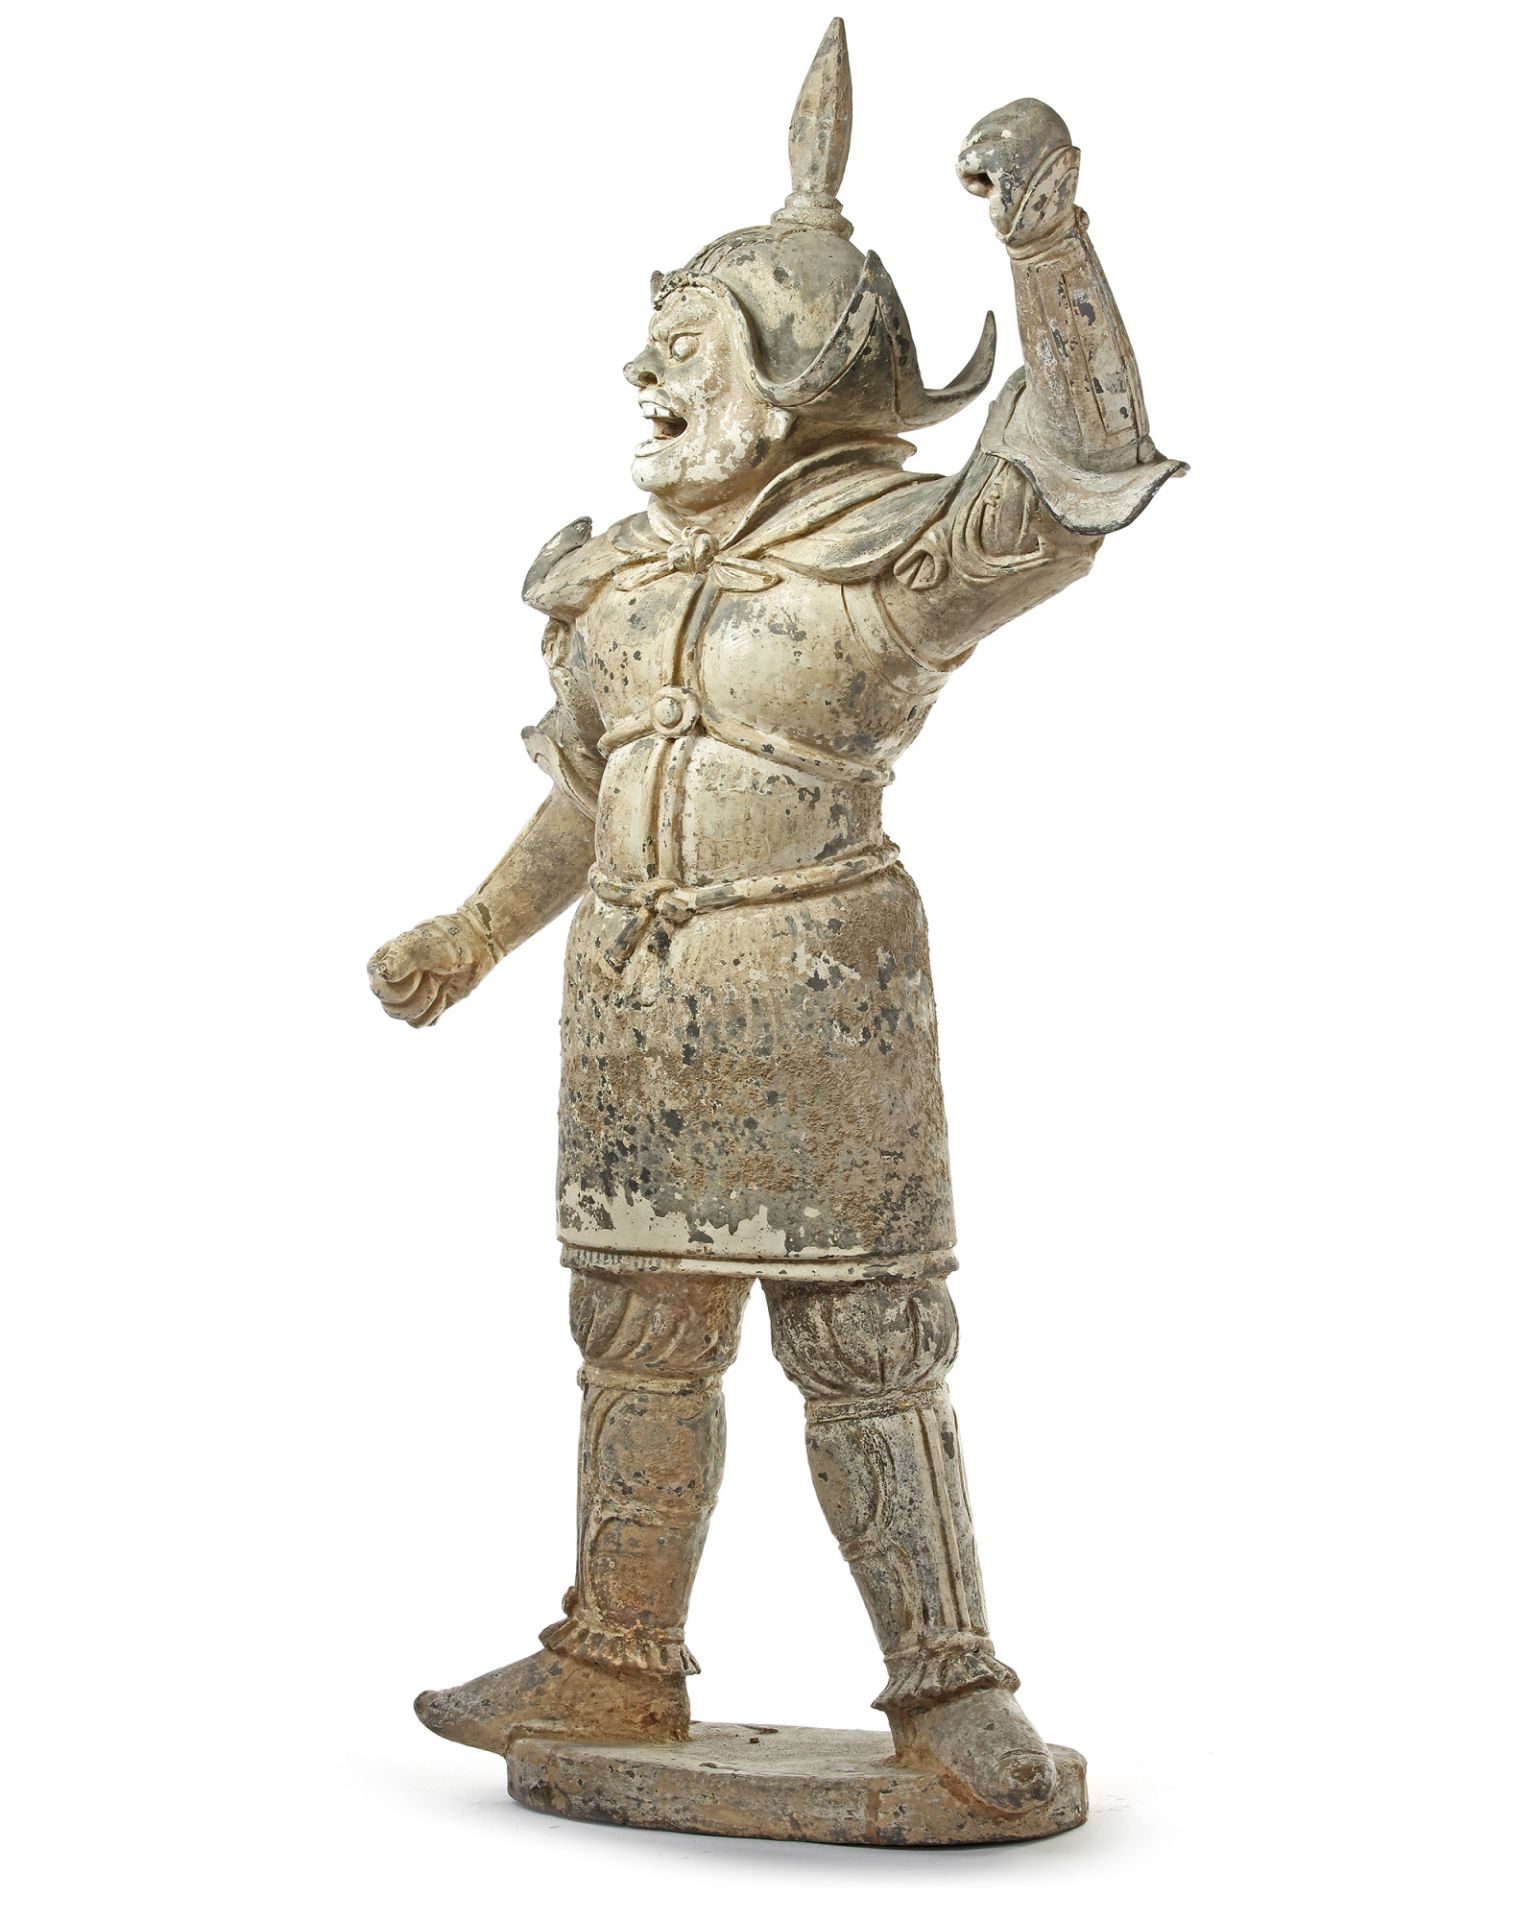 A LARGE CHINESE POTTERY GUARDIAN KING, EARLY TANG DYNASTY, MID 7TH CENTURY - Image 2 of 6